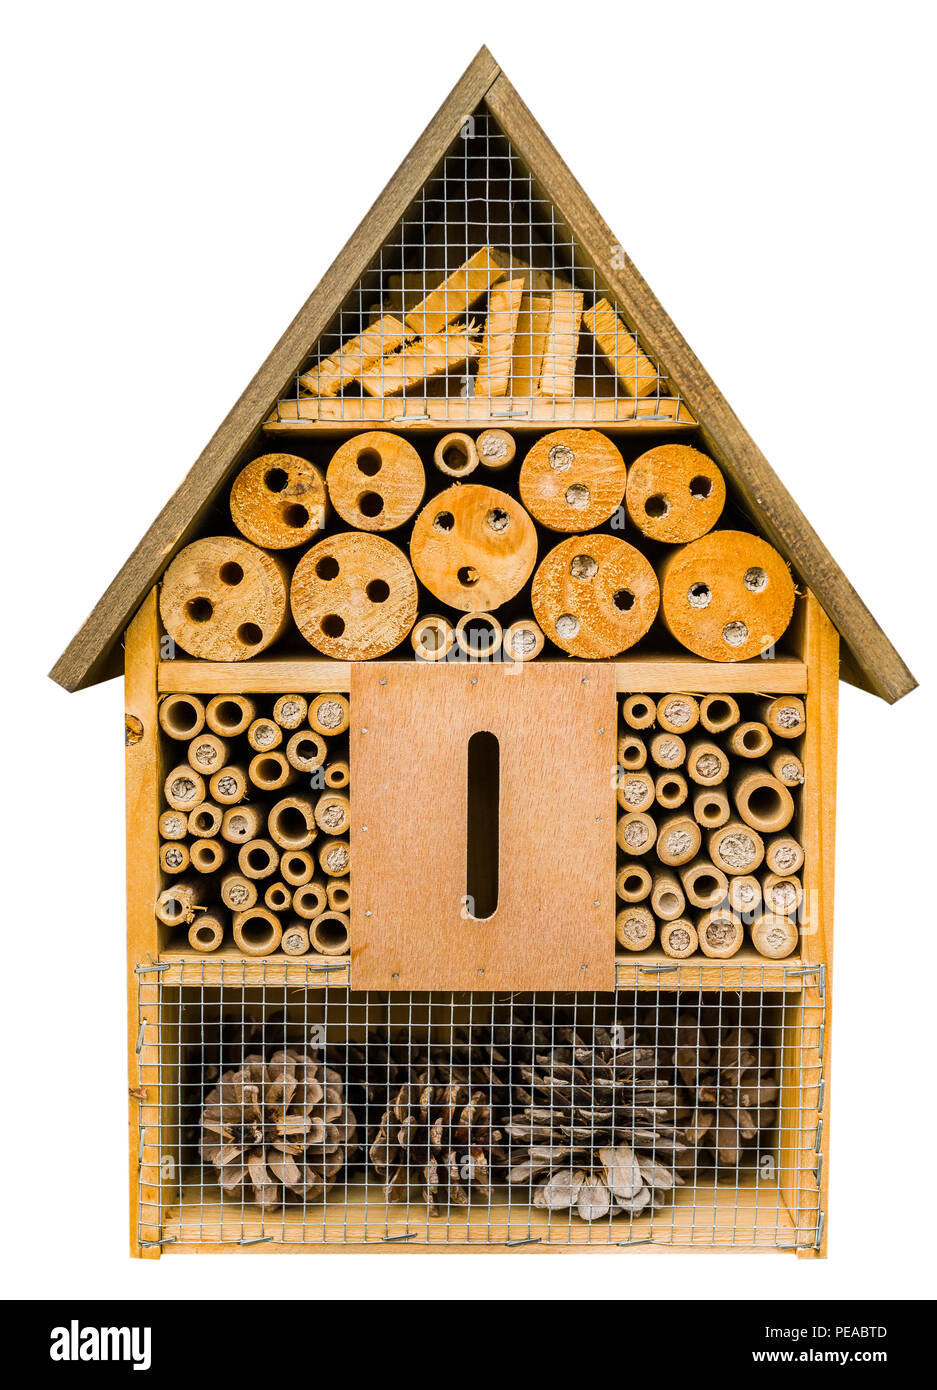 Insects hotel on white background Stock Photo